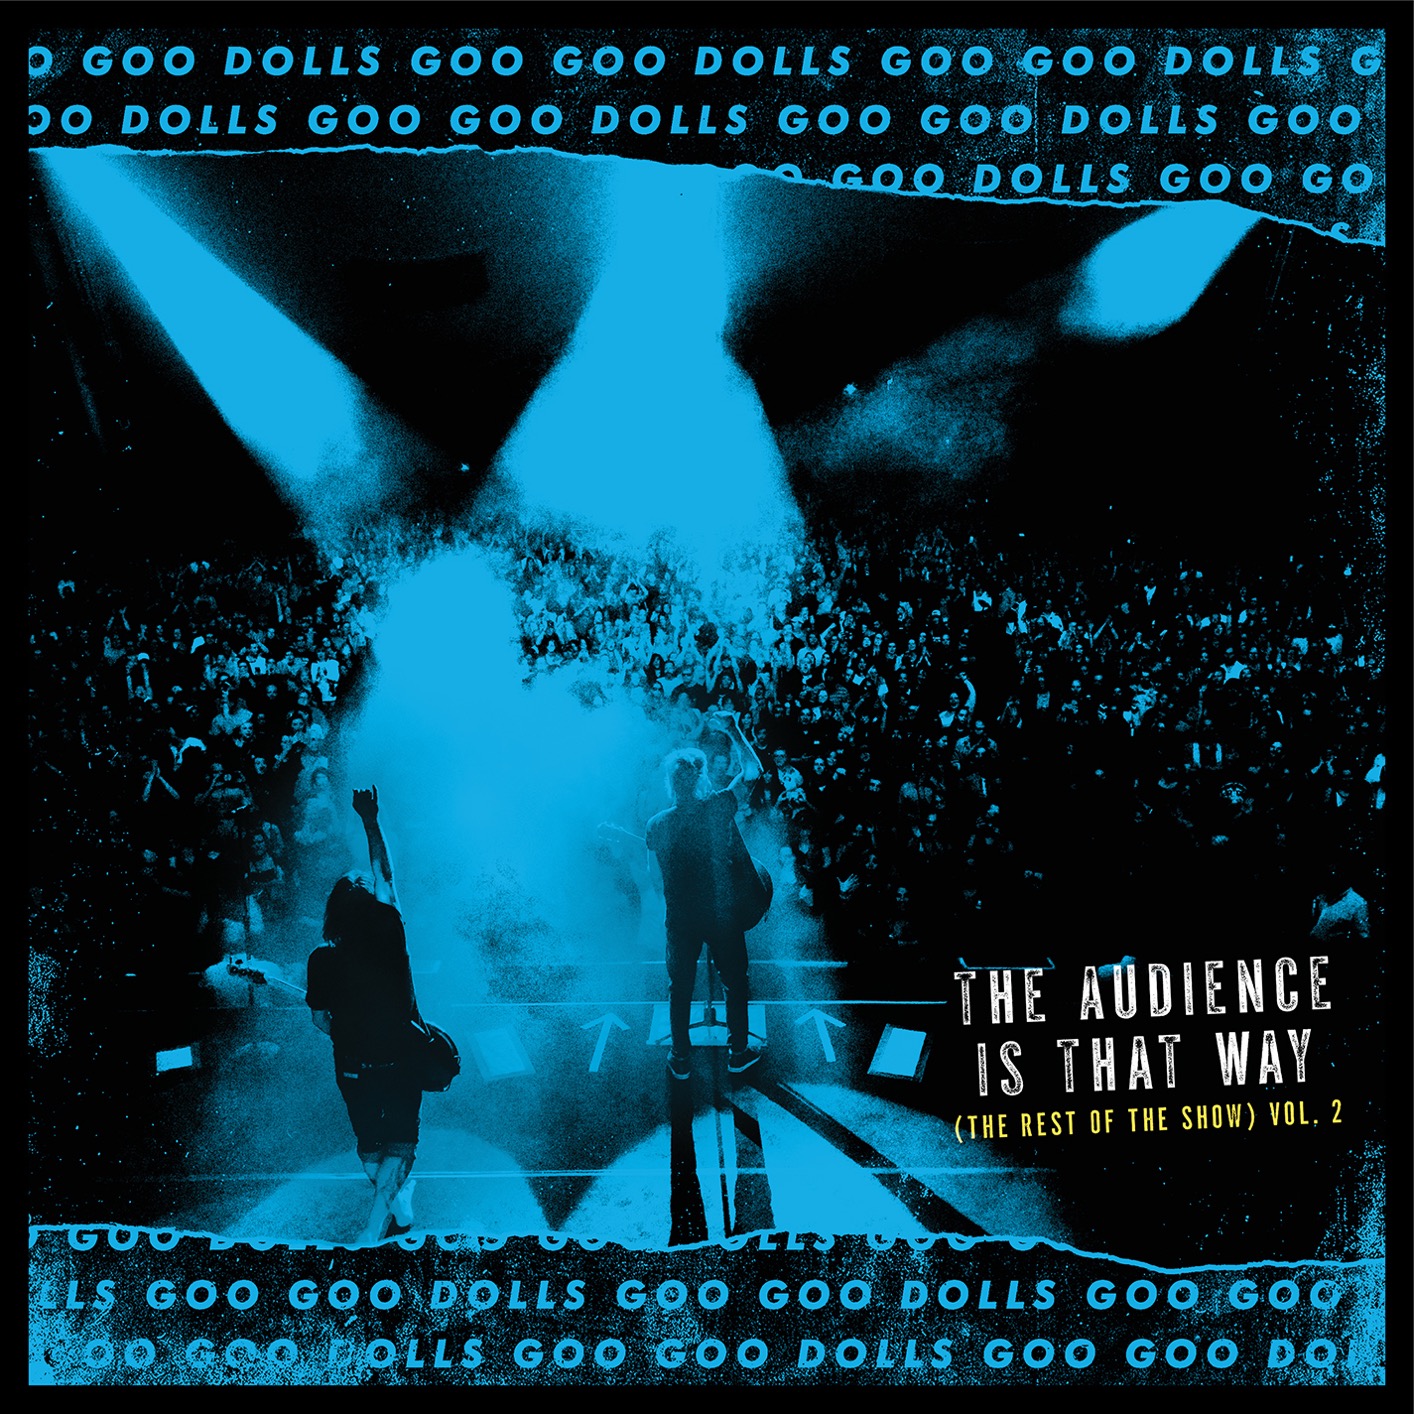 The Goo Goo Dolls – The Audience Is That Way (The Rest of the Show) Vol. 2 (2019) [FLAC 24bit/48kHz]